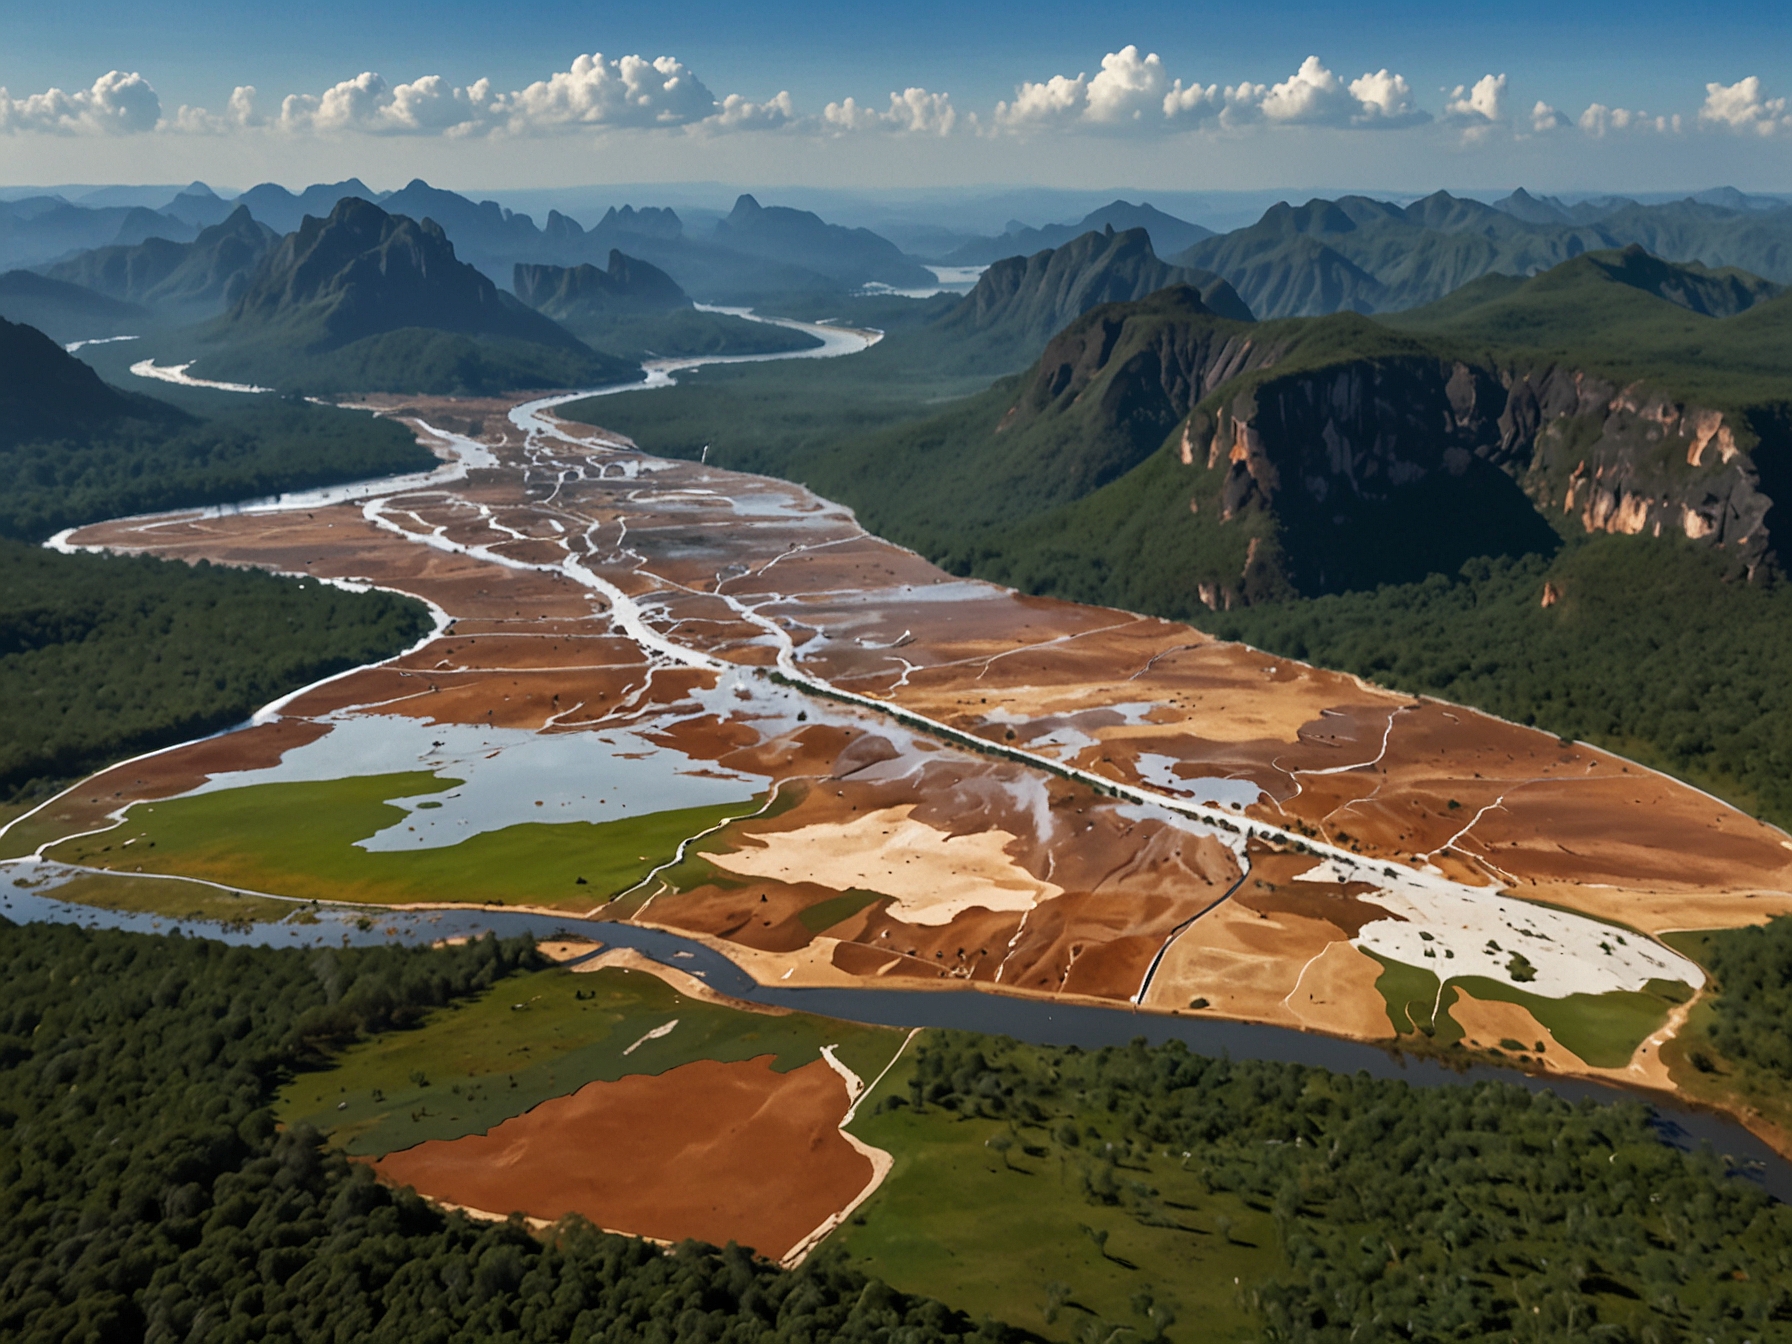 Aerial view of Atlas Lithium's expanded mineral rights area in the Doce River and Mucuri Valleys, showcasing the vast and untapped lithium-rich territories in Brazil.